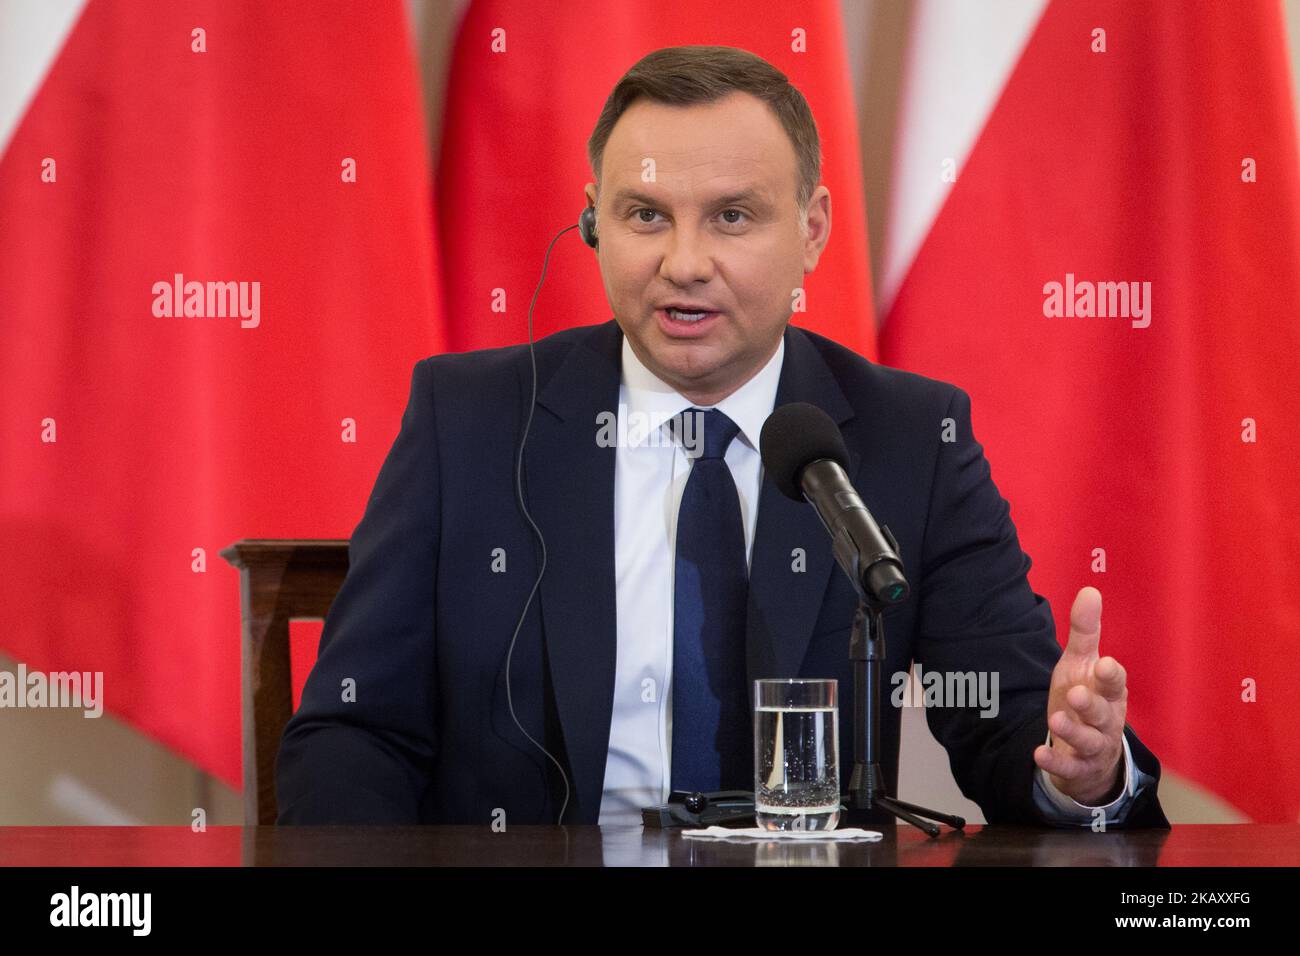 President of Poland Andrzej Duda during the press conference with President of the Czech Republic Milos Zeman at Presidential Palace in Warsaw, Poland on 10 May 2018 (Photo by Mateusz Wlodarczyk/NurPhoto) Stock Photo